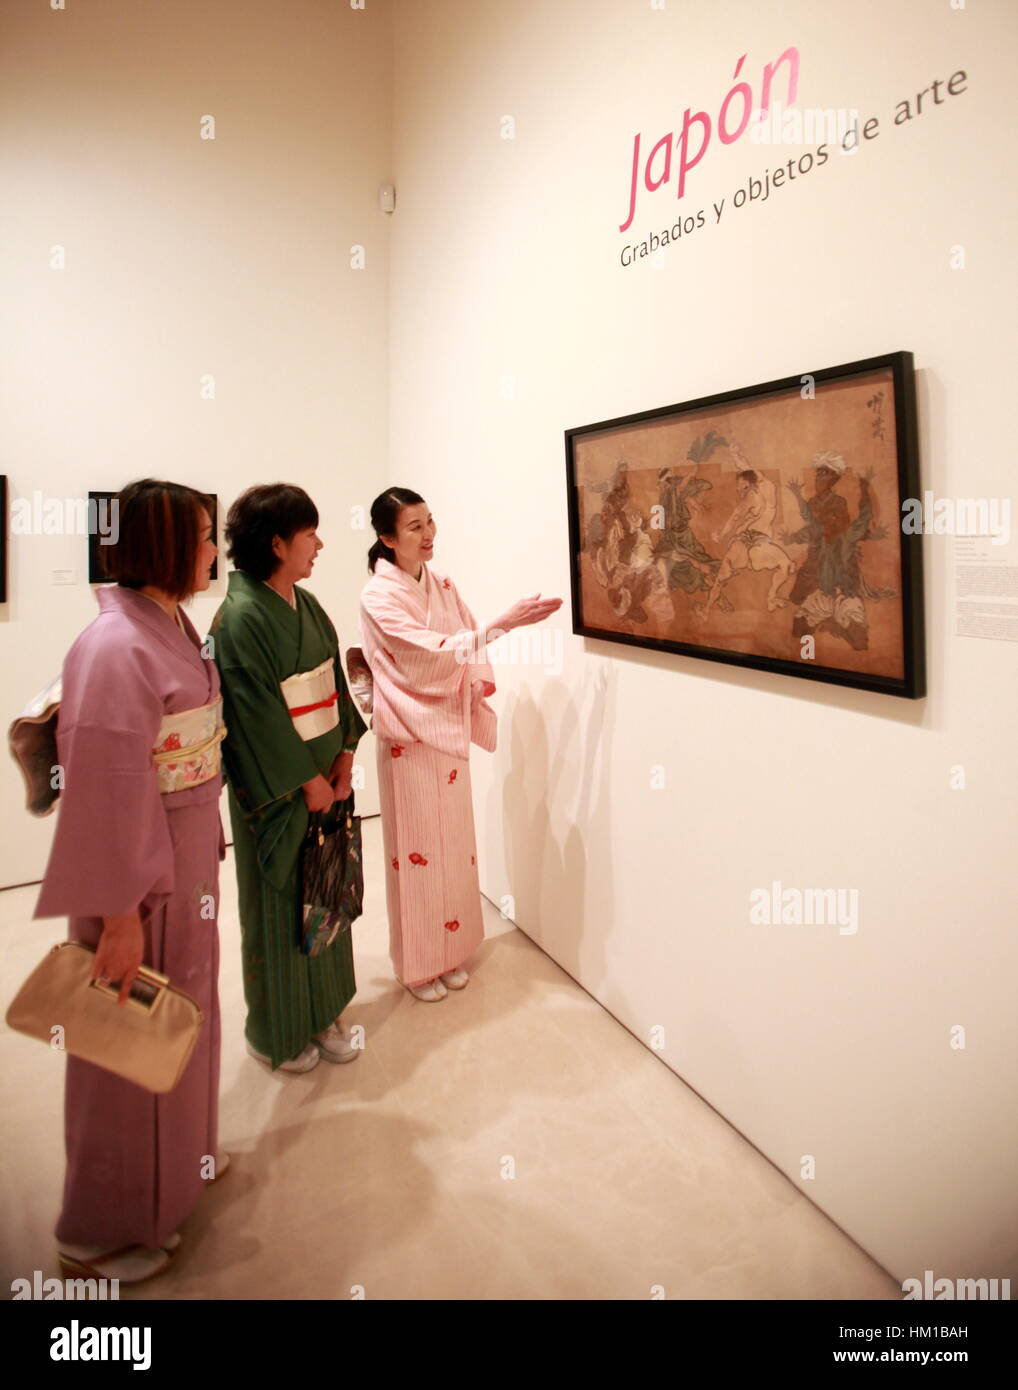 January 30, 2017 - The Carmen Thyssen Museum Malaga has inaugurated this Monday the new temporary exhibition 'Japan. Engravings and objects of art 'that can be visited until 23 April and which gathers a selection of ukiyo-e prints from the 18th century and urushi lacquer pieces from the main artists of the time belonging to the collection of the Museum of Fine Arts of Bilbao. Credit: Fotos Lorenzo Carnero/ZUMA Wire/Alamy Live News Stock Photo